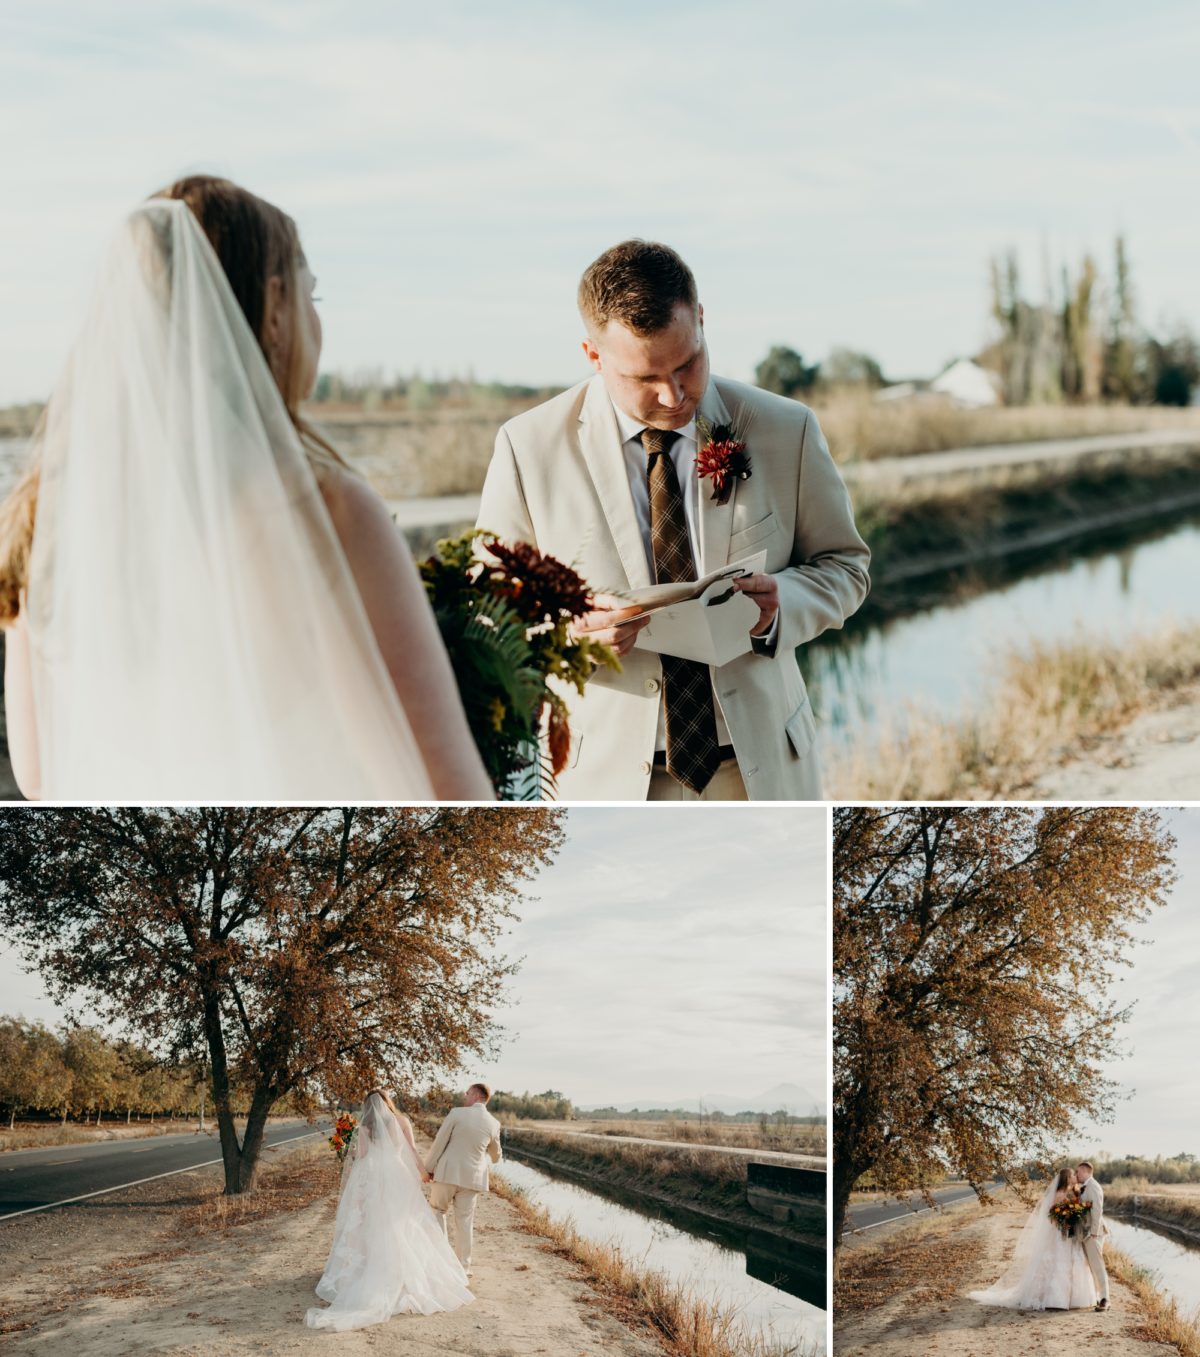 Gridley Wedding Photography by Briana Morrison